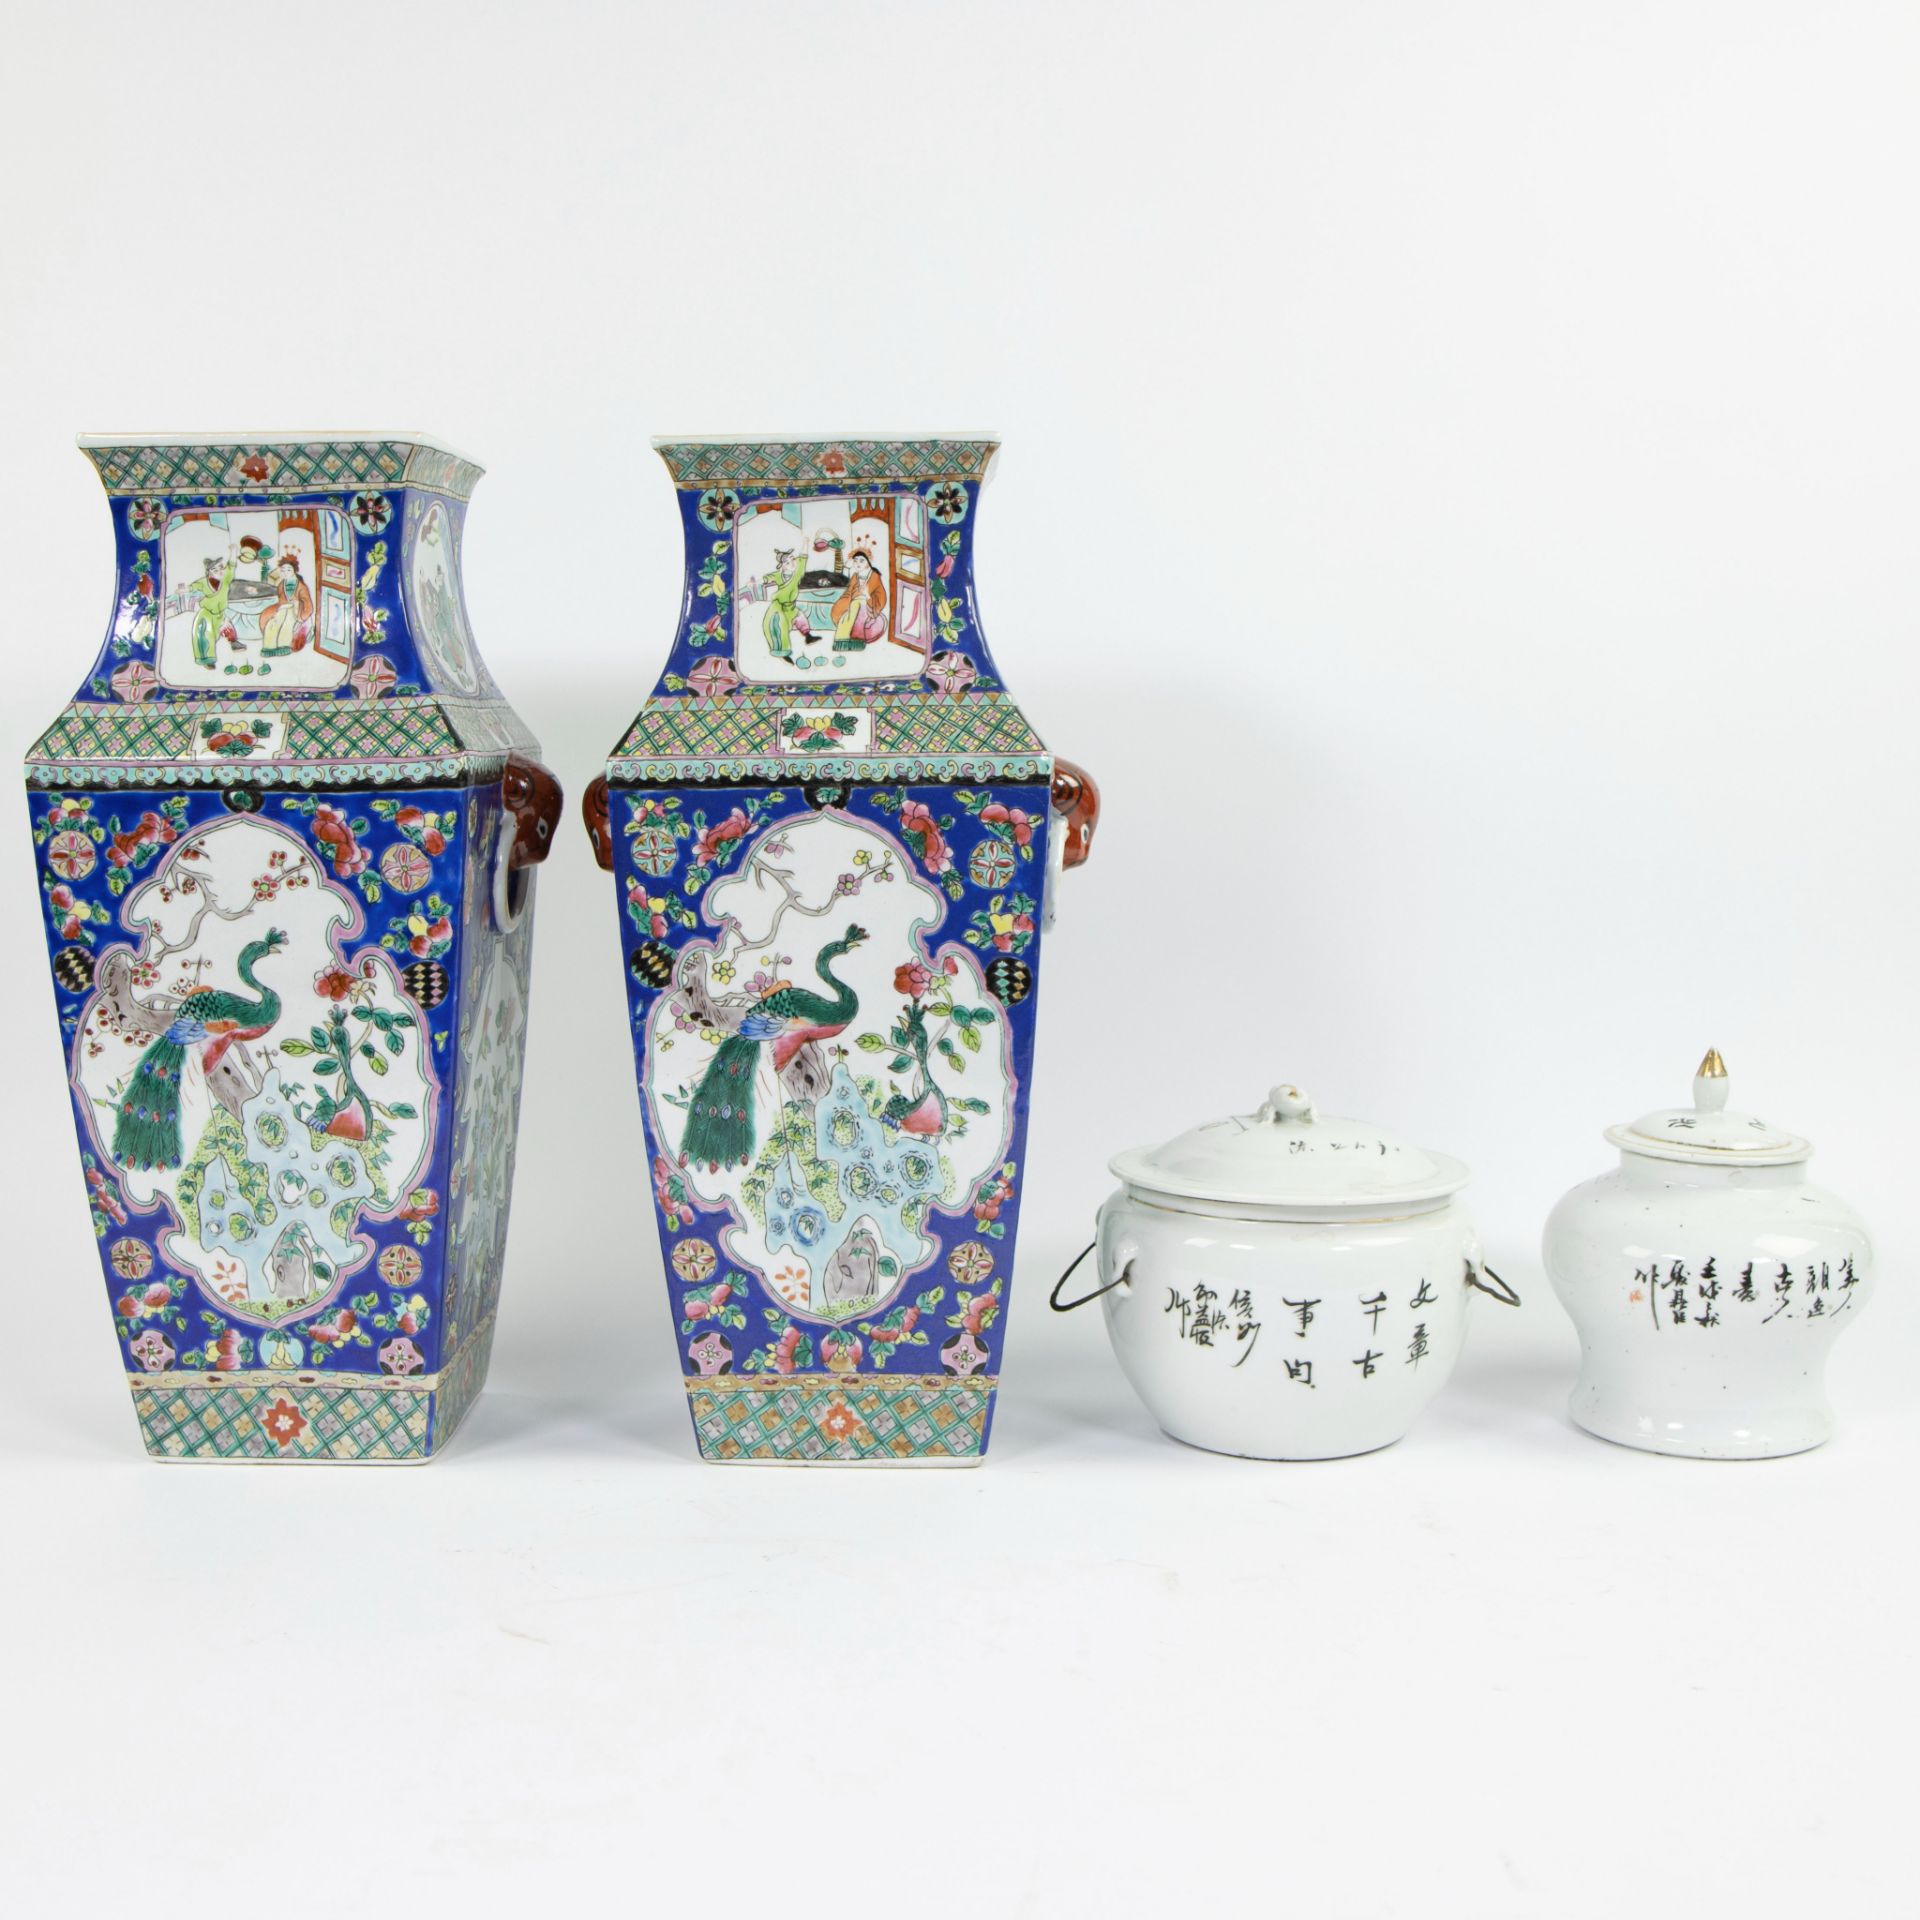 A collection of Chinese porcelain, 2 19th century lidded jars and a pair of blue famille rose vases - Image 3 of 8